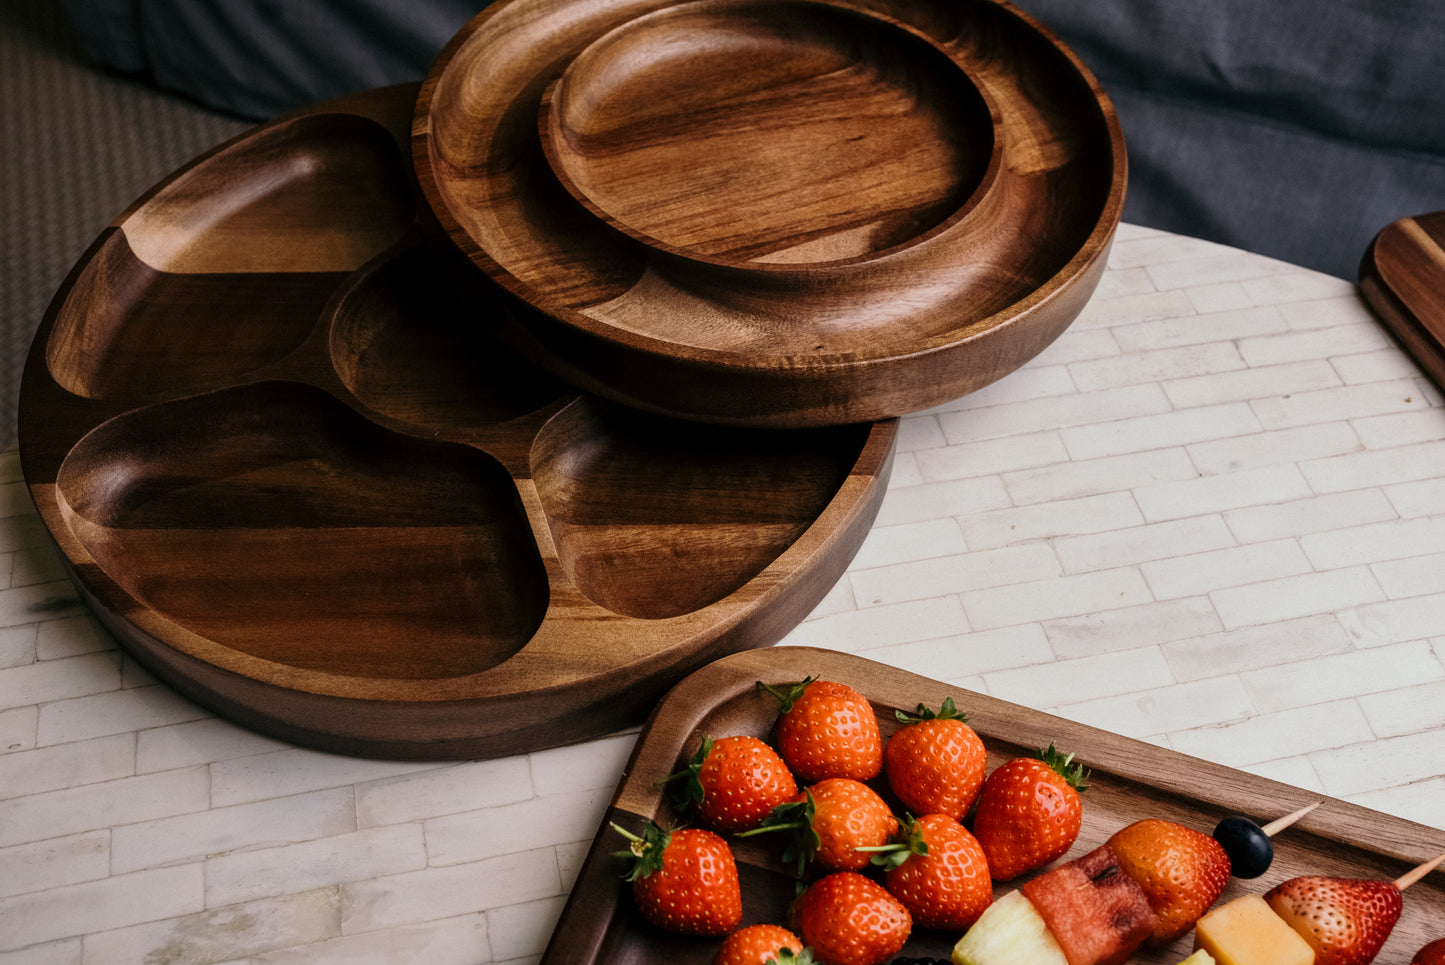 Round Wooden Fruit Tray 32 cm / 13" - Vague